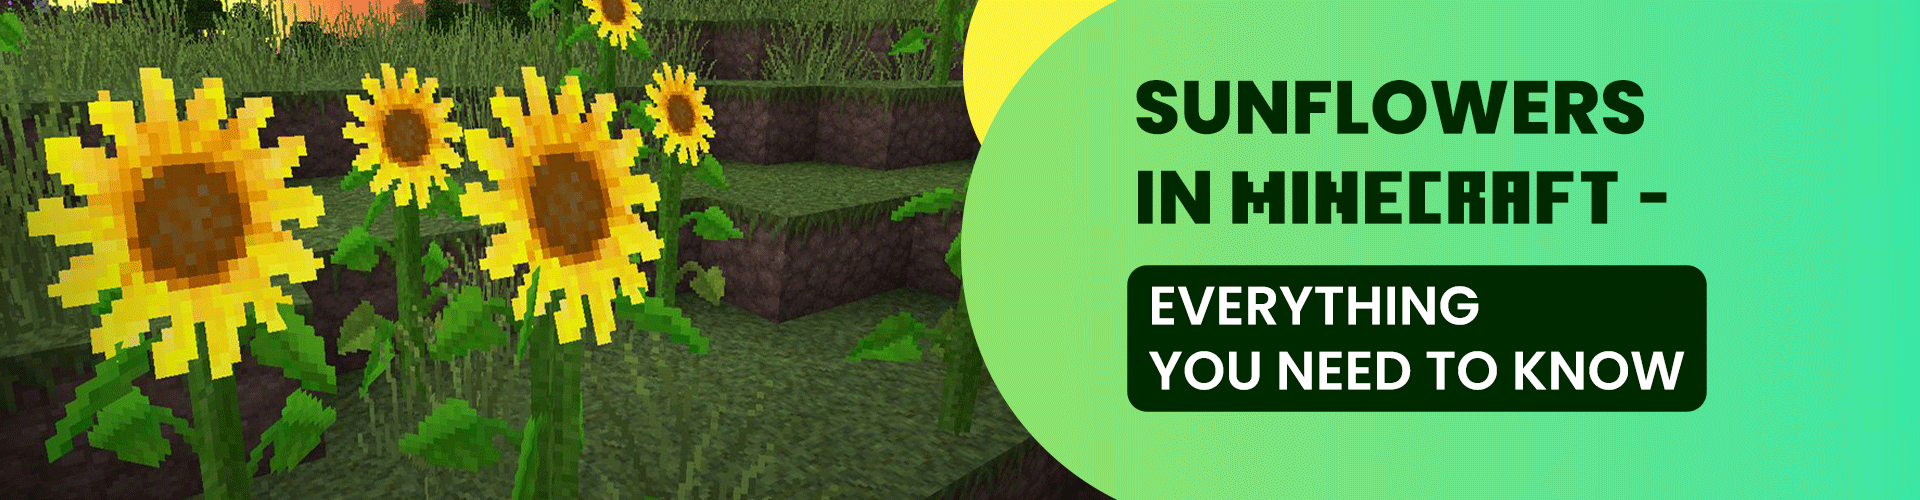 Sunflowers in Minecraft - Everything You Need to Know